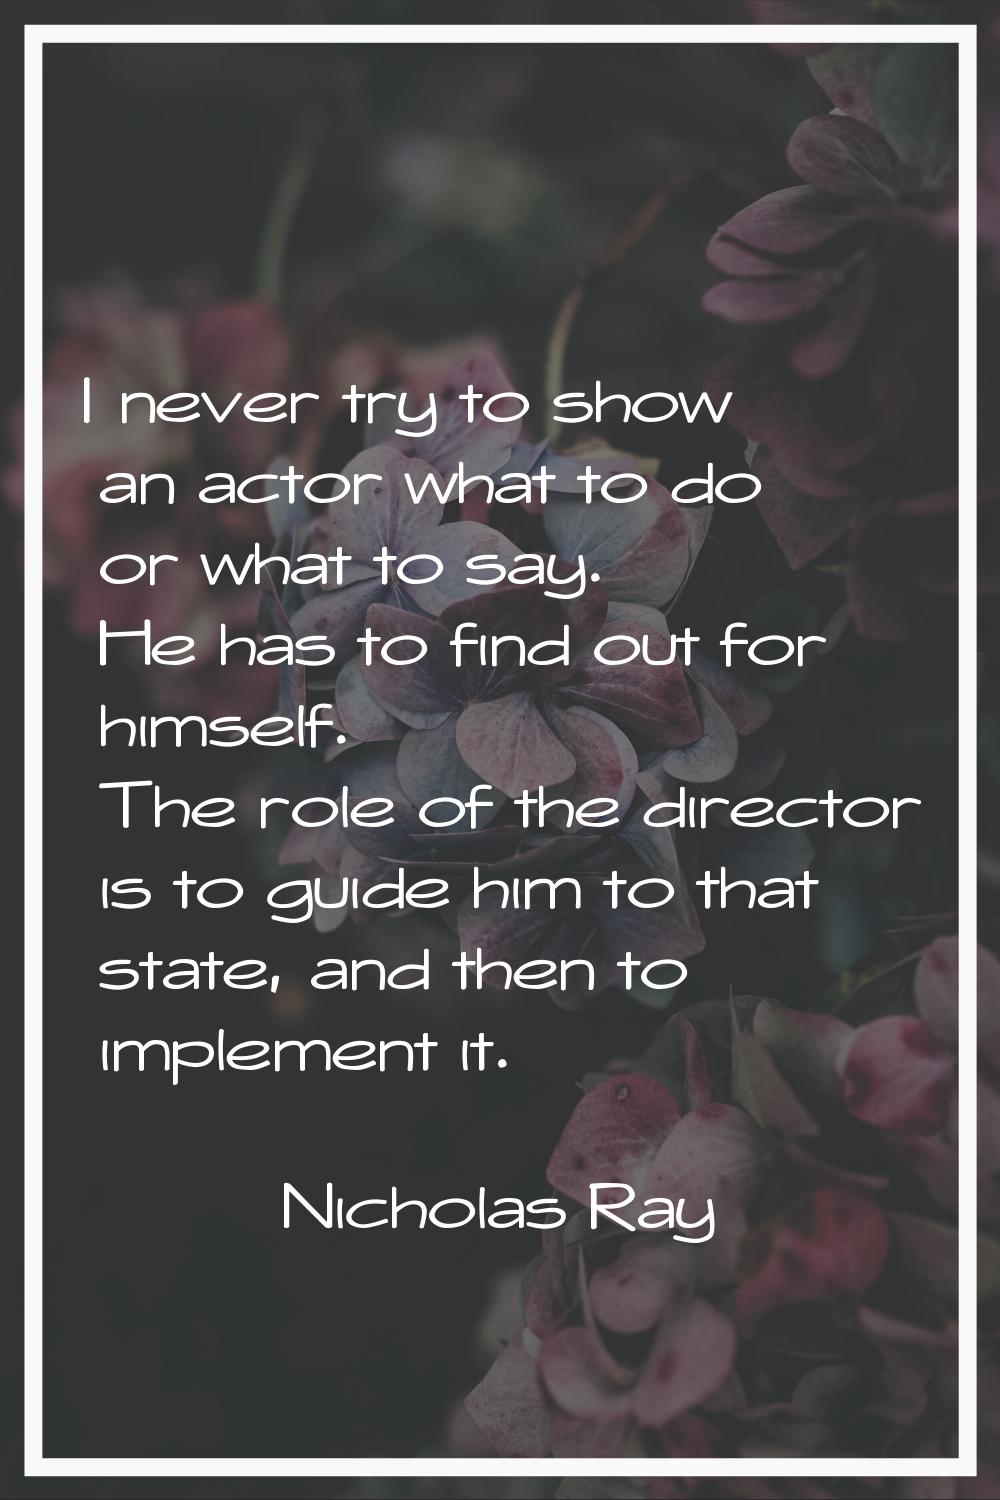 I never try to show an actor what to do or what to say. He has to find out for himself. The role of